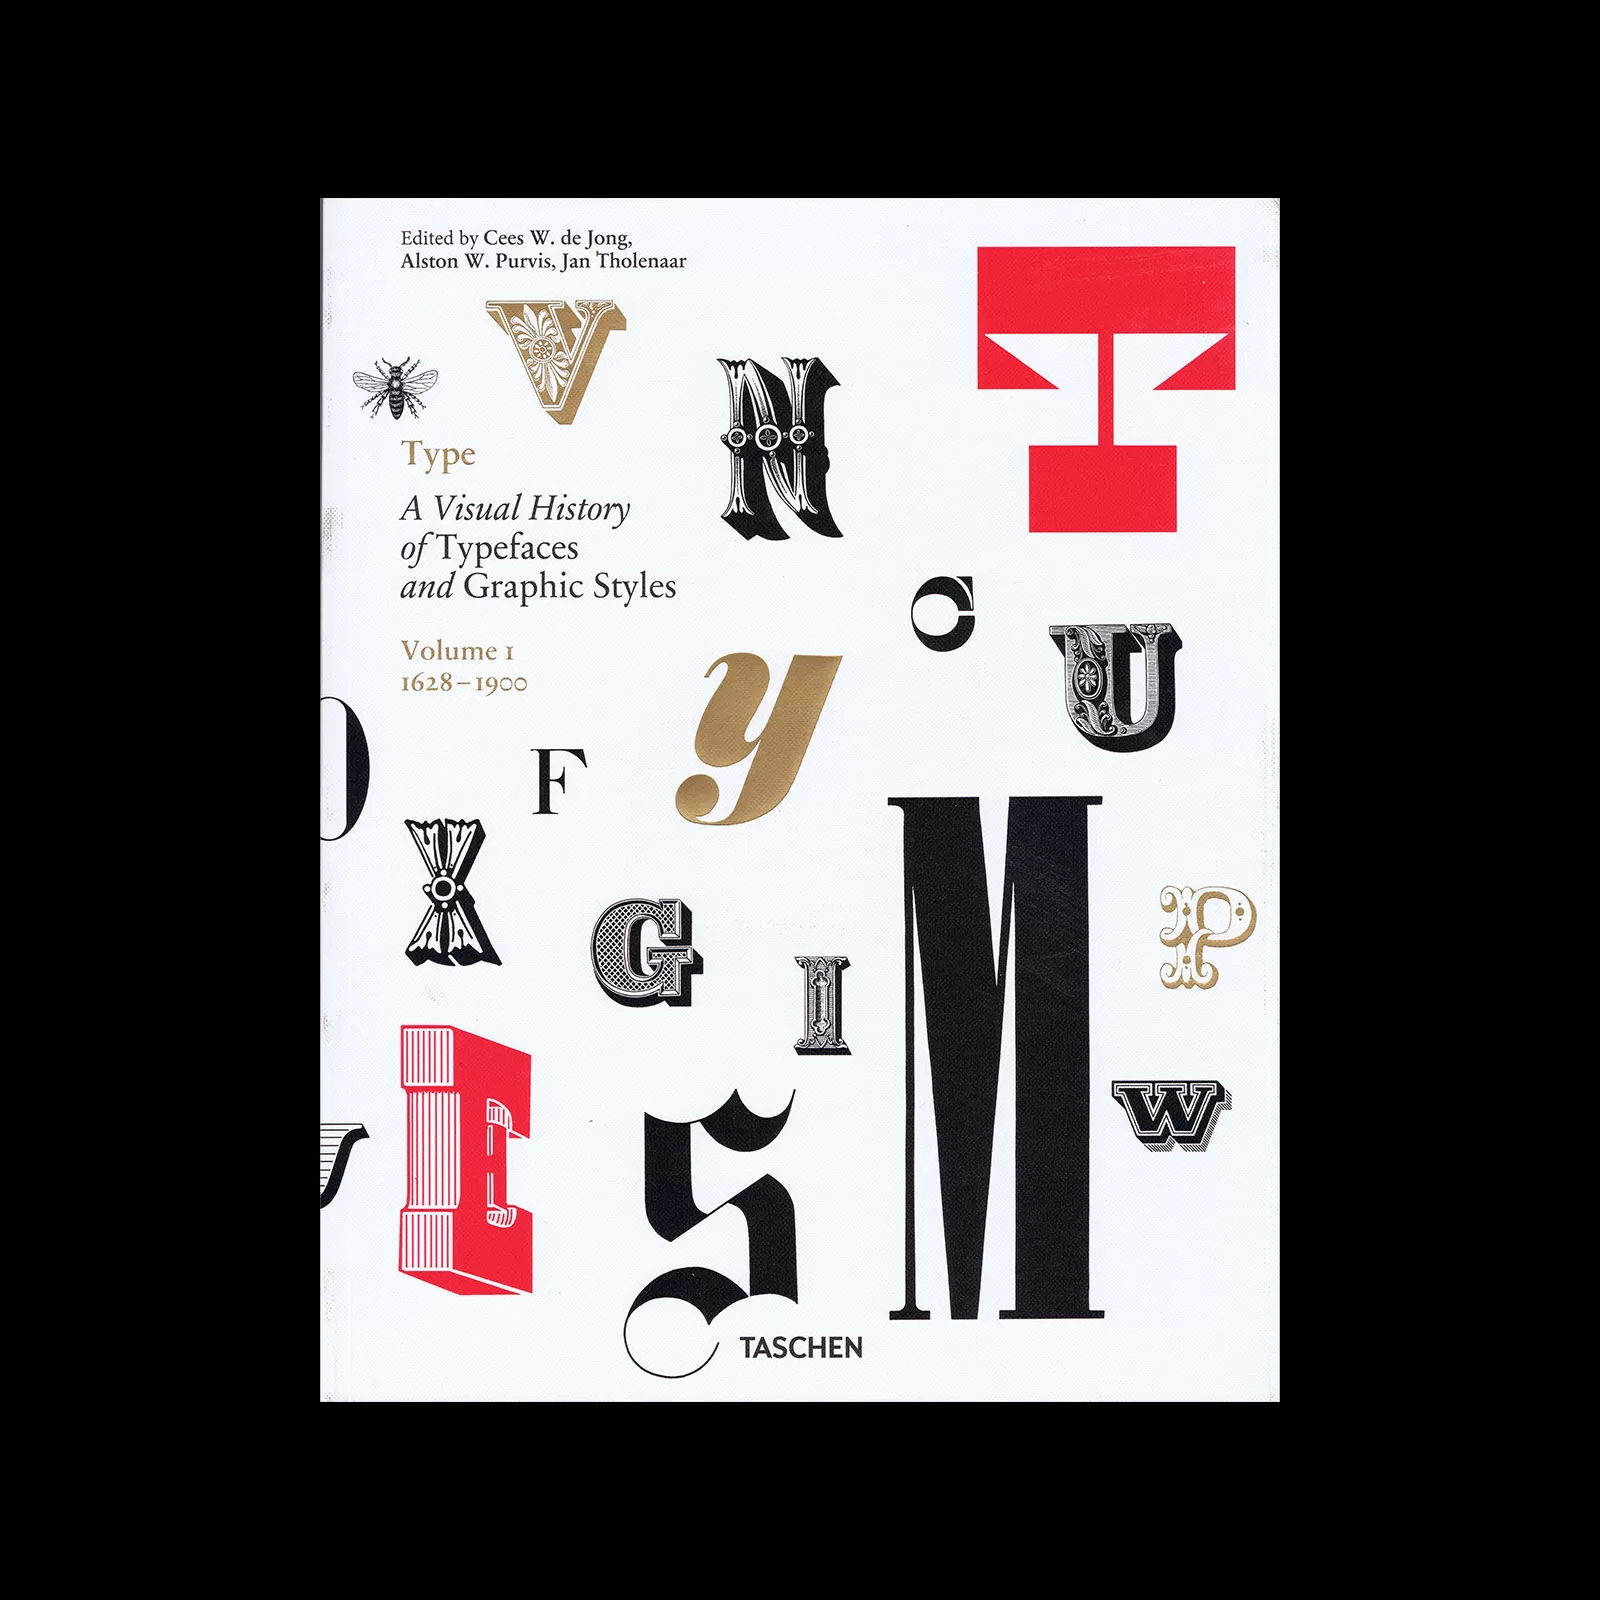 Type. A Visual History of Typefaces and Graphic Styles, Taschen, 2013